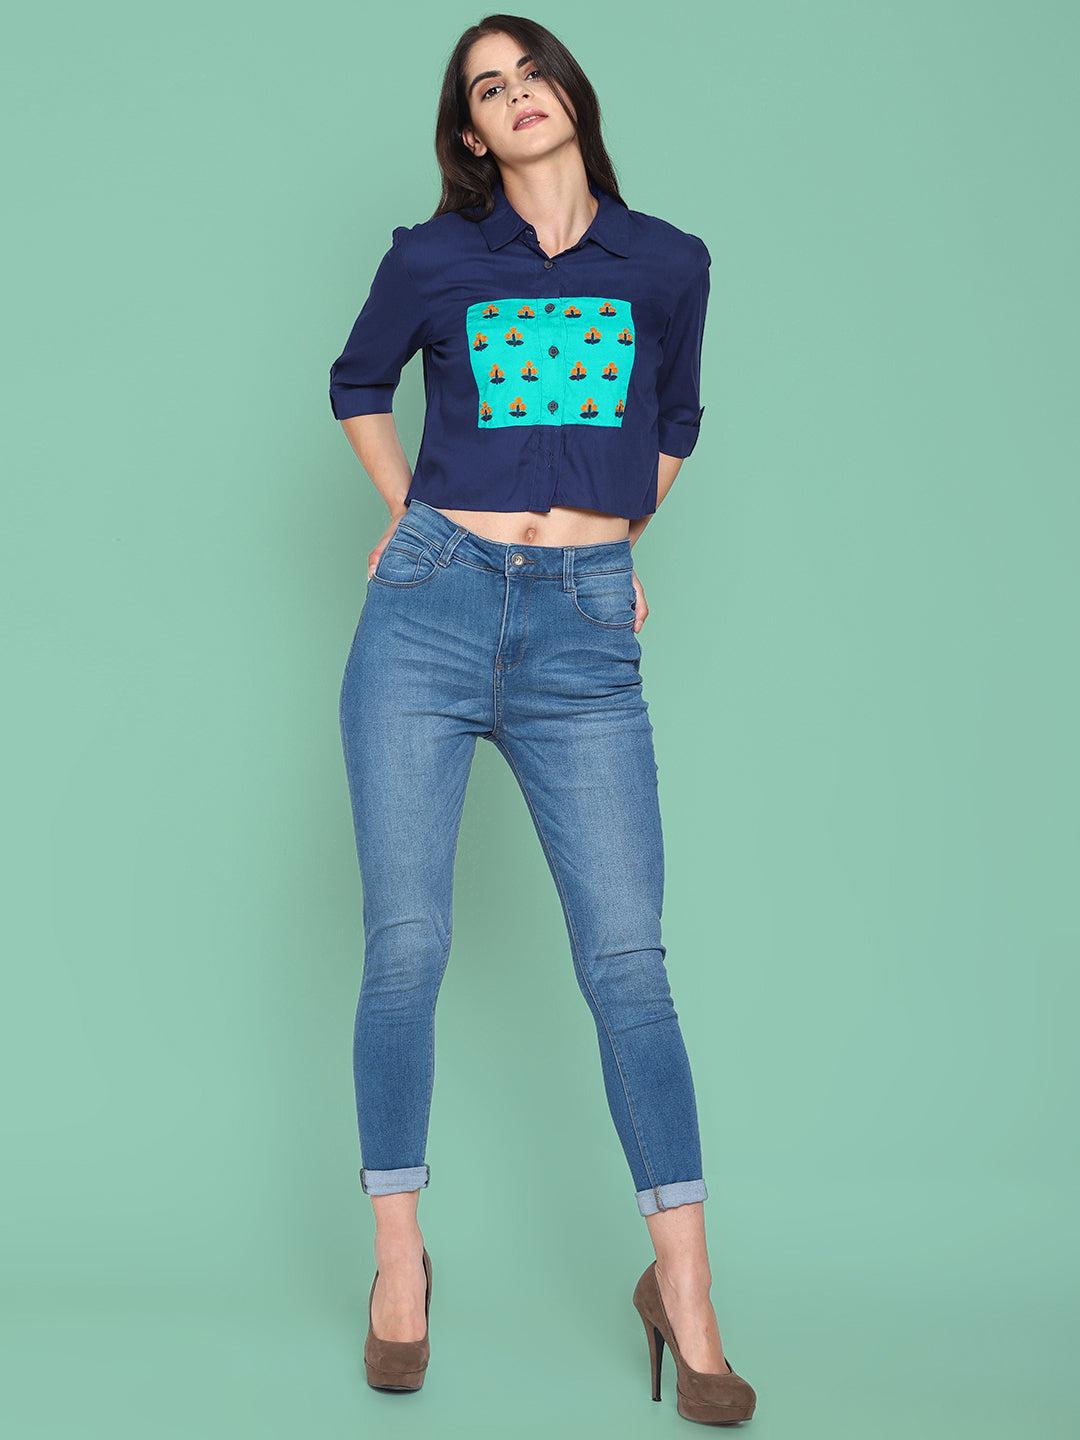 navy-bluecolor-block-crop-top-with-embroidery